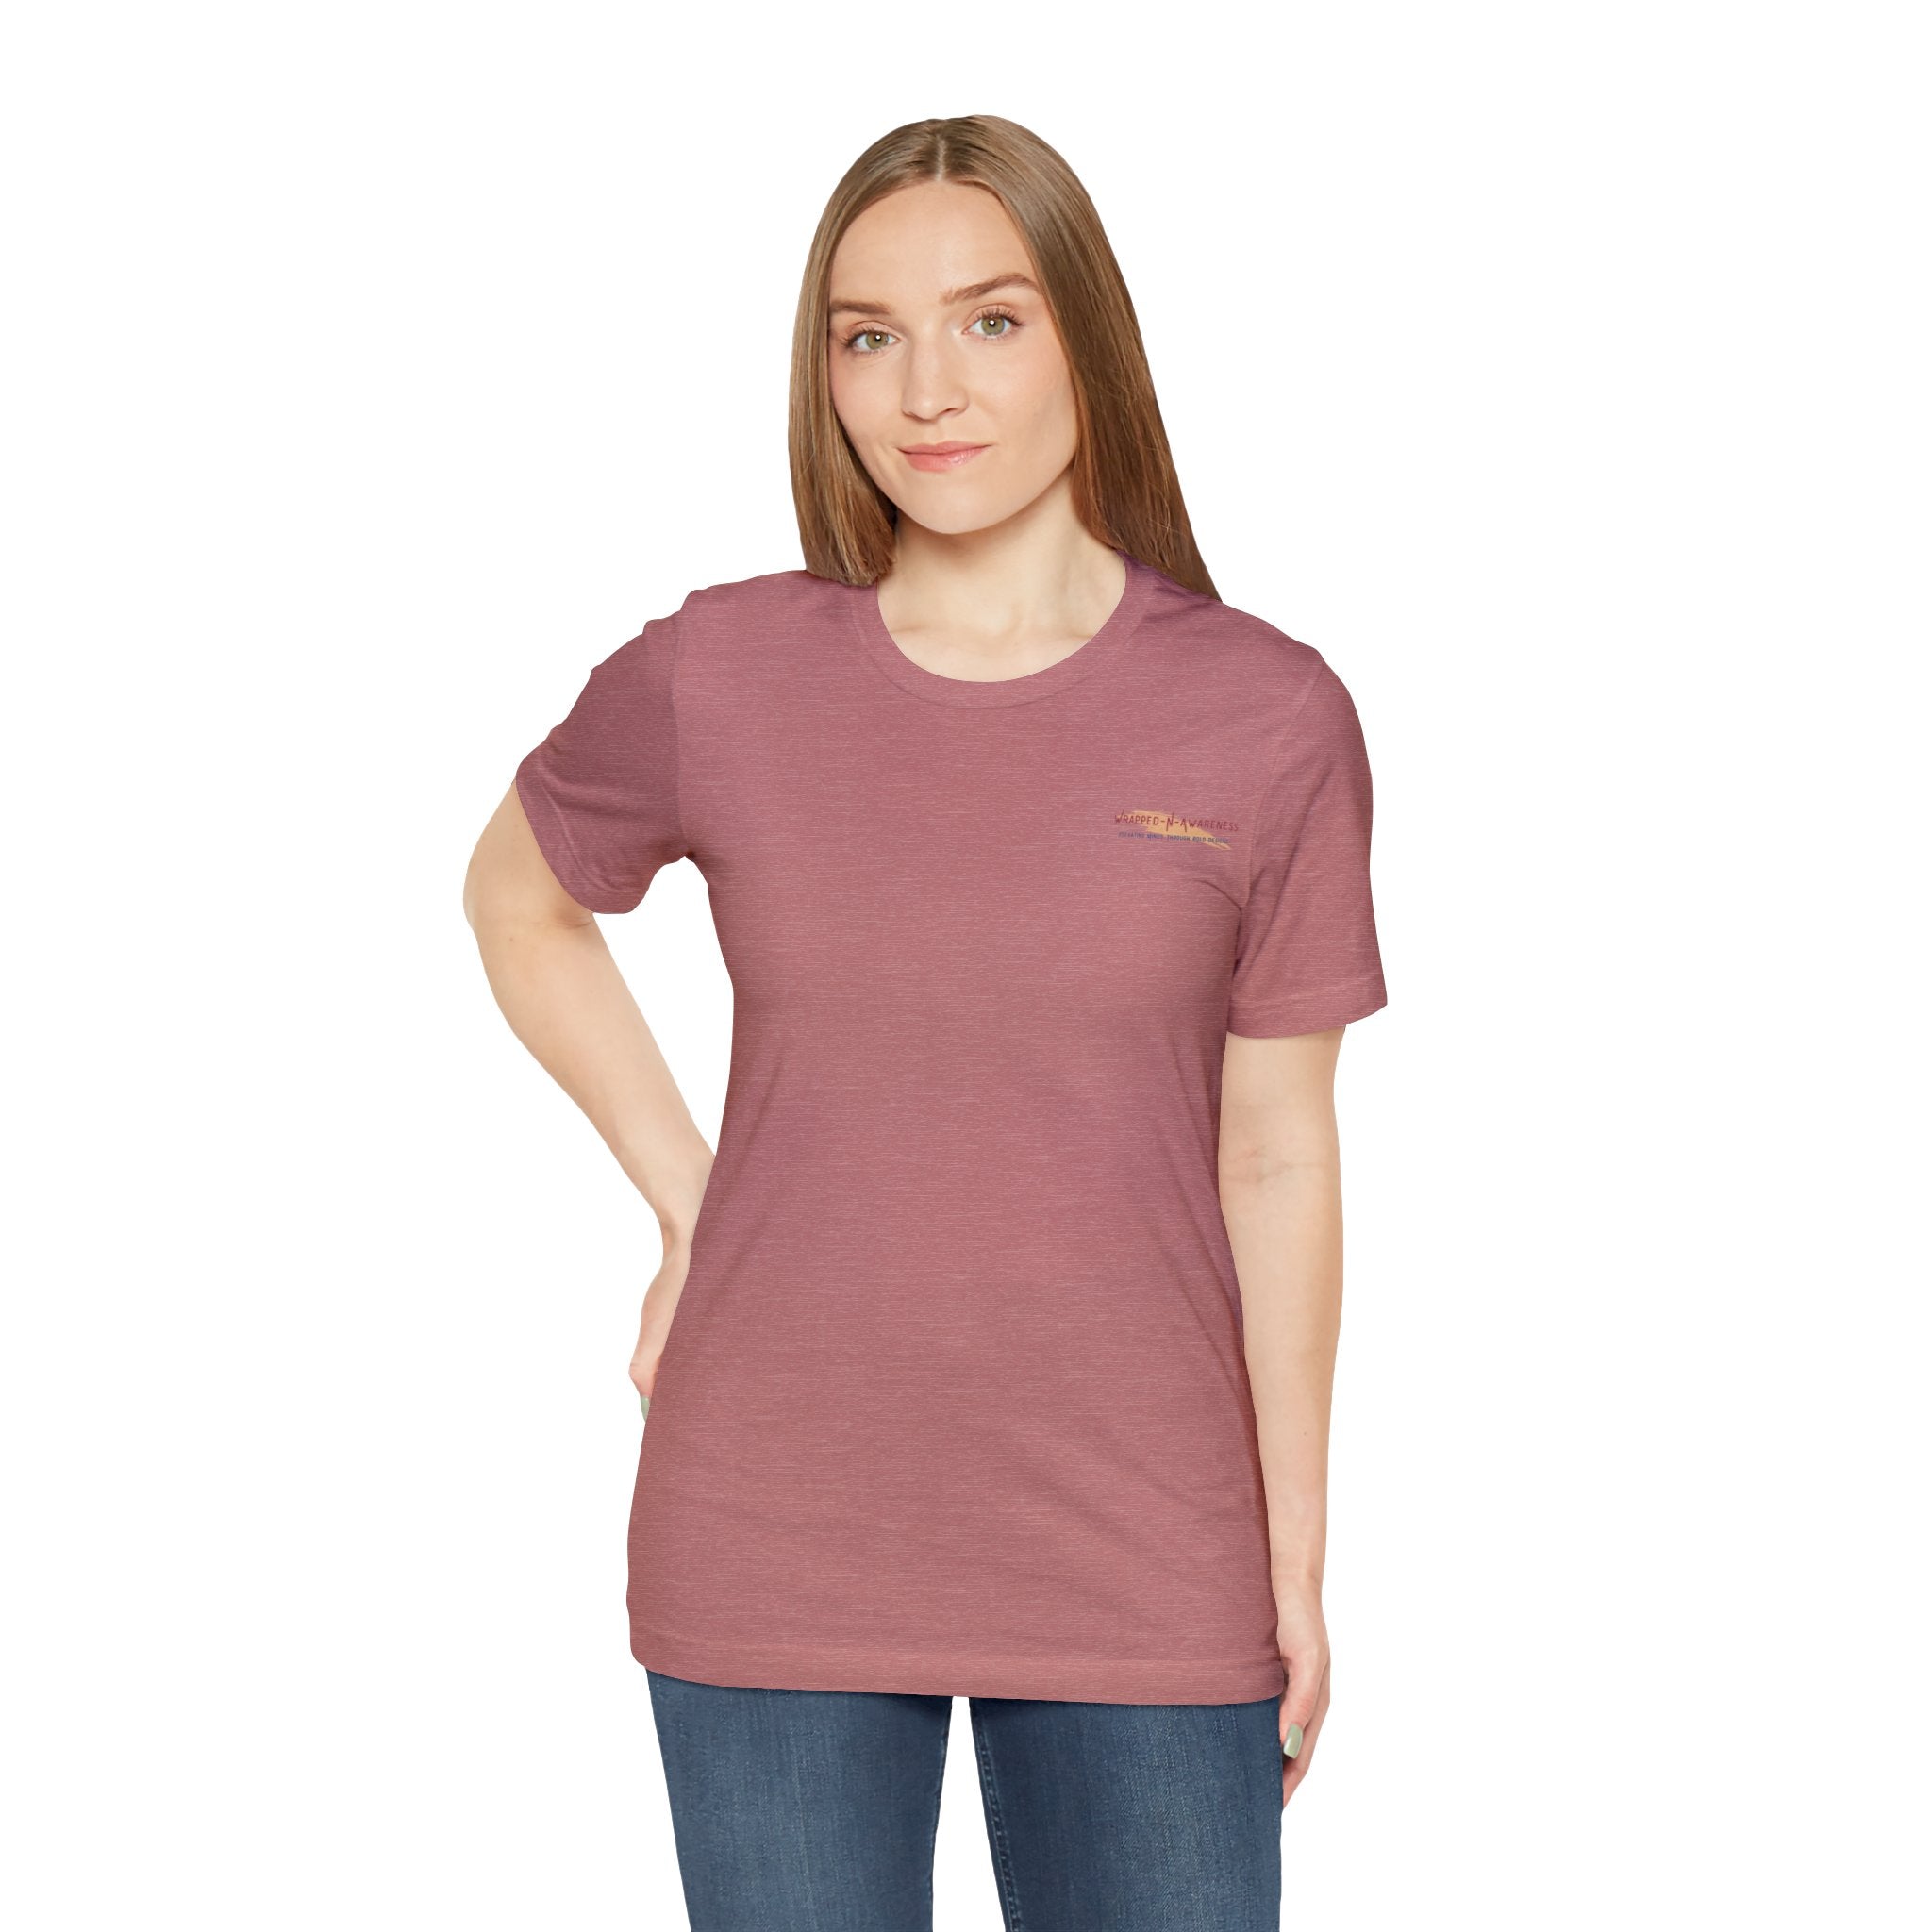 Hope Conquers Fear Jersey Tee - Bella+Canvas 3001 Heather Ice Blue Airlume Cotton Bella+Canvas 3001 Crew Neckline Jersey Short Sleeve Lightweight Fabric Mental Health Support Retail Fit Tear-away Label Tee Unisex Tee T-Shirt 11681536647402545099_2048 Printify